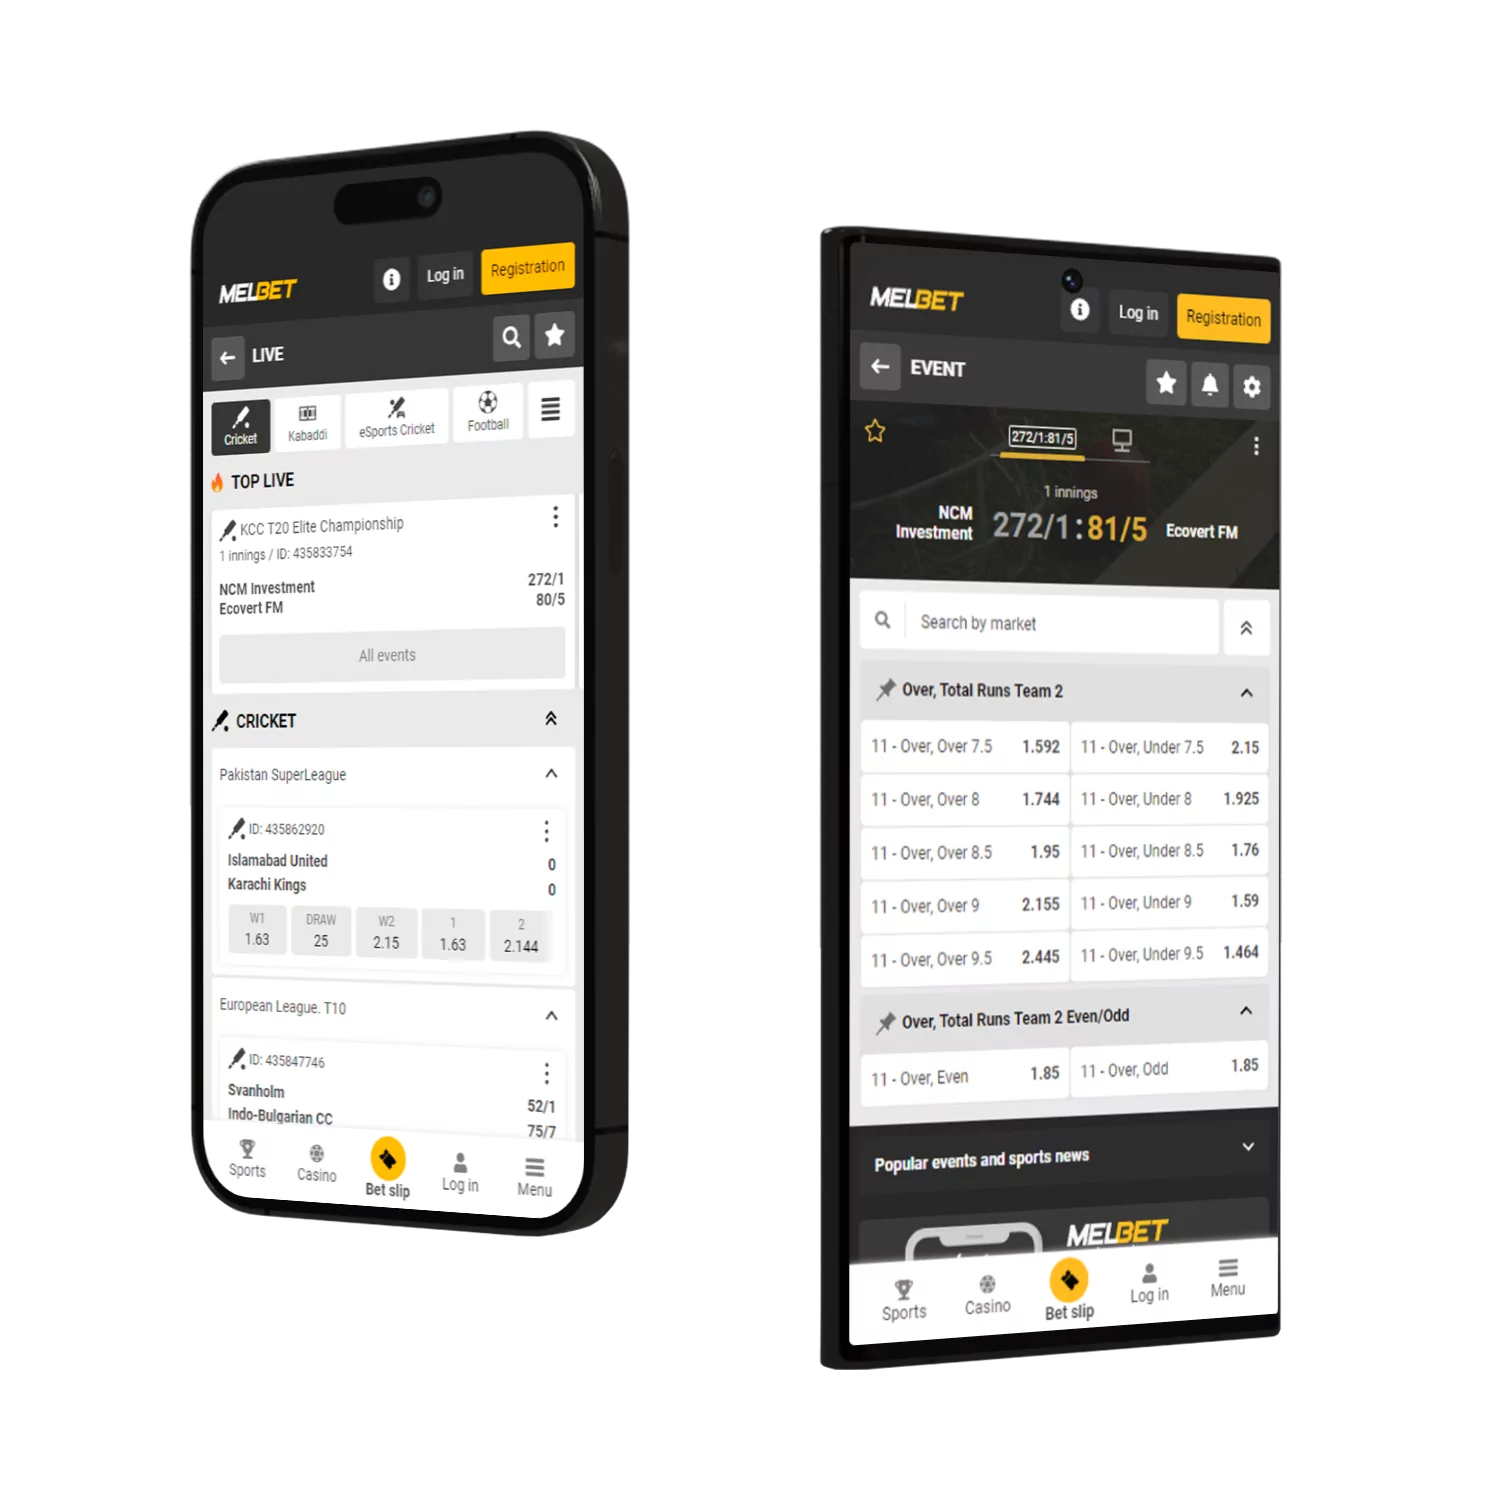 You can place bets on live cricket events in the Melbet app.